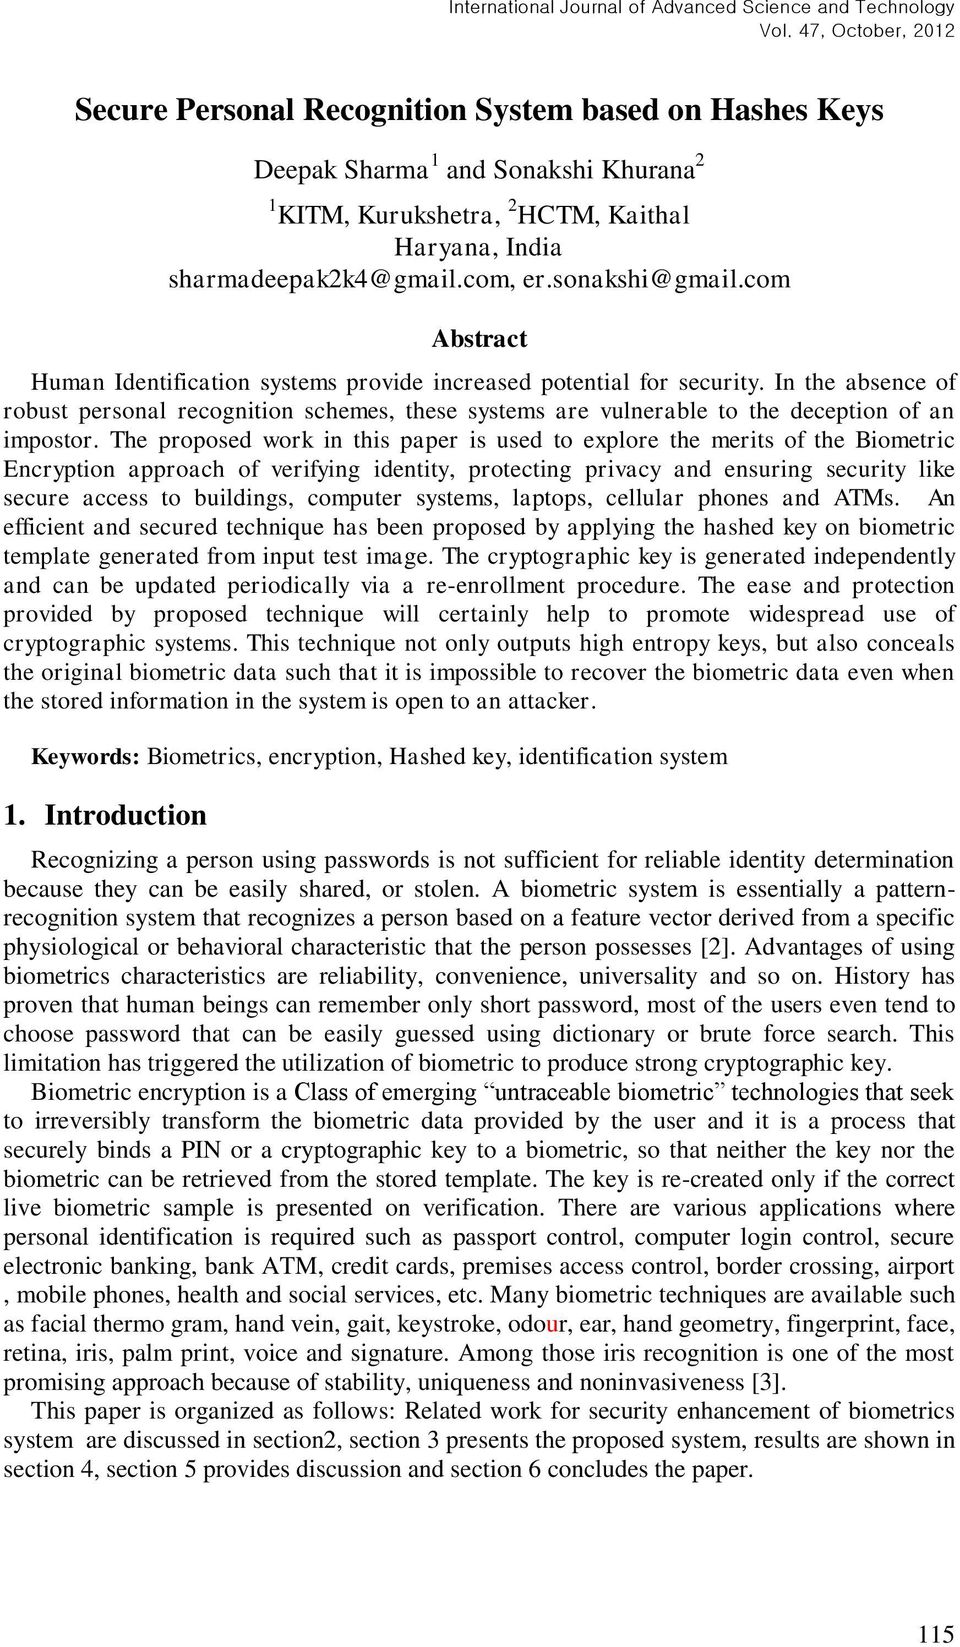 The proposed work in this paper is used to explore the merits of the Biometric Encryption approach of verifying identity, protecting privacy and ensuring security like secure access to buildings,